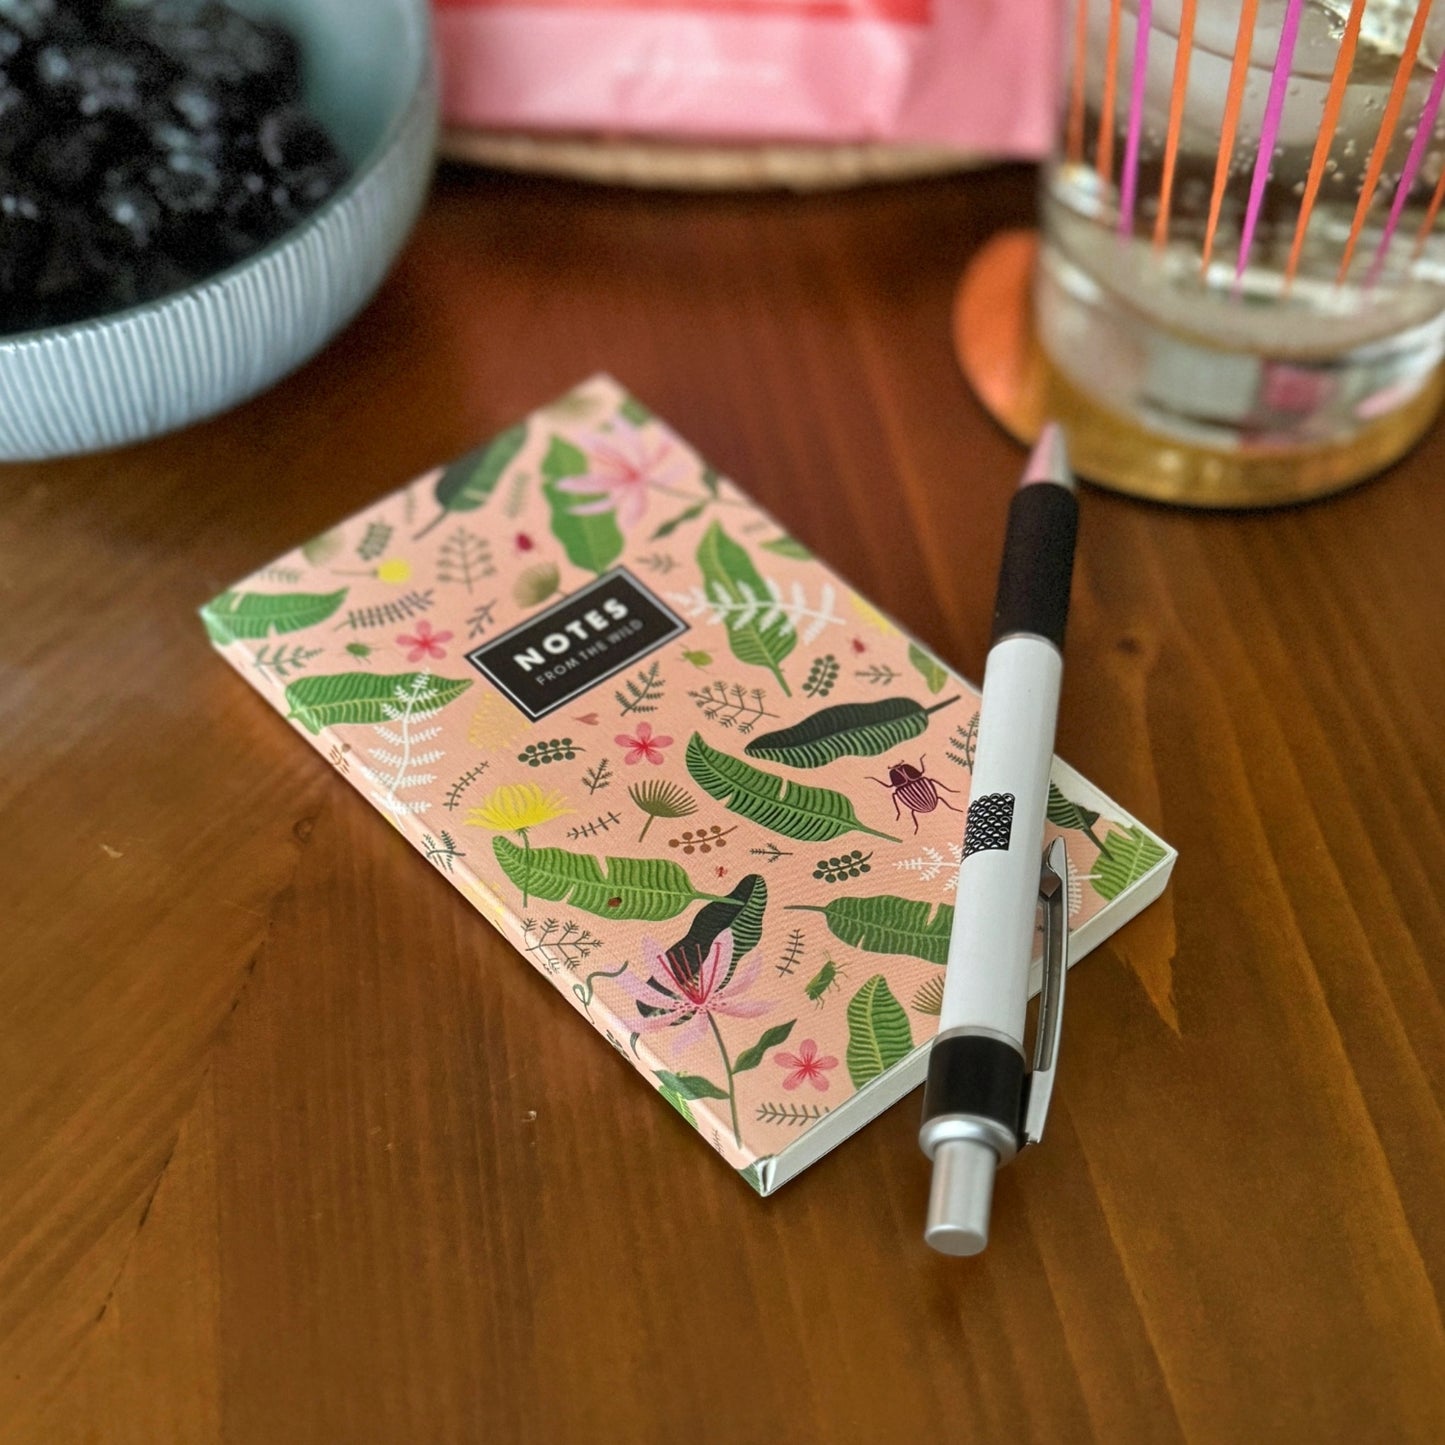 Small notebook with pink and green motif on table with pen and a glass